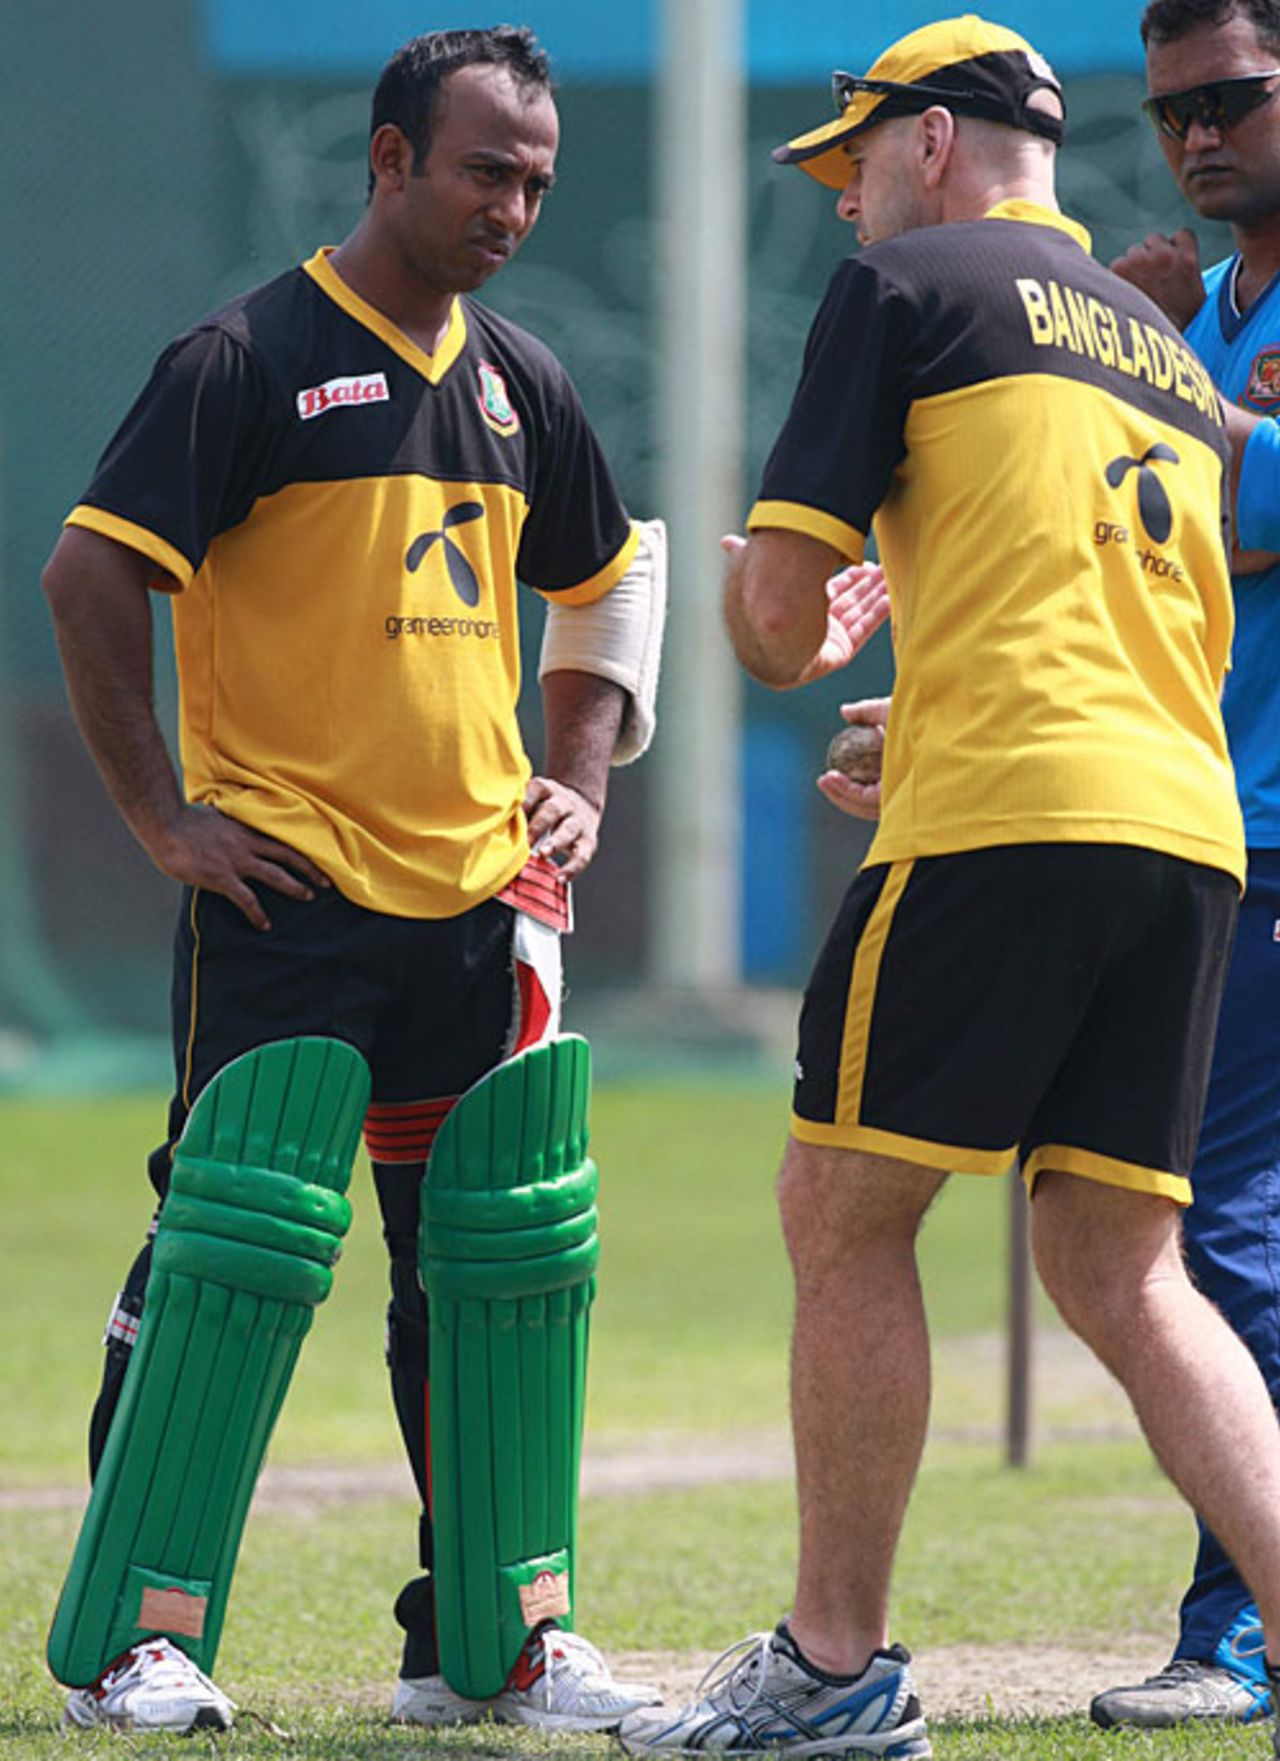 Aftab Ahmed gets a few pointers from Jamie Siddons, Dhaka, March 1, 2010